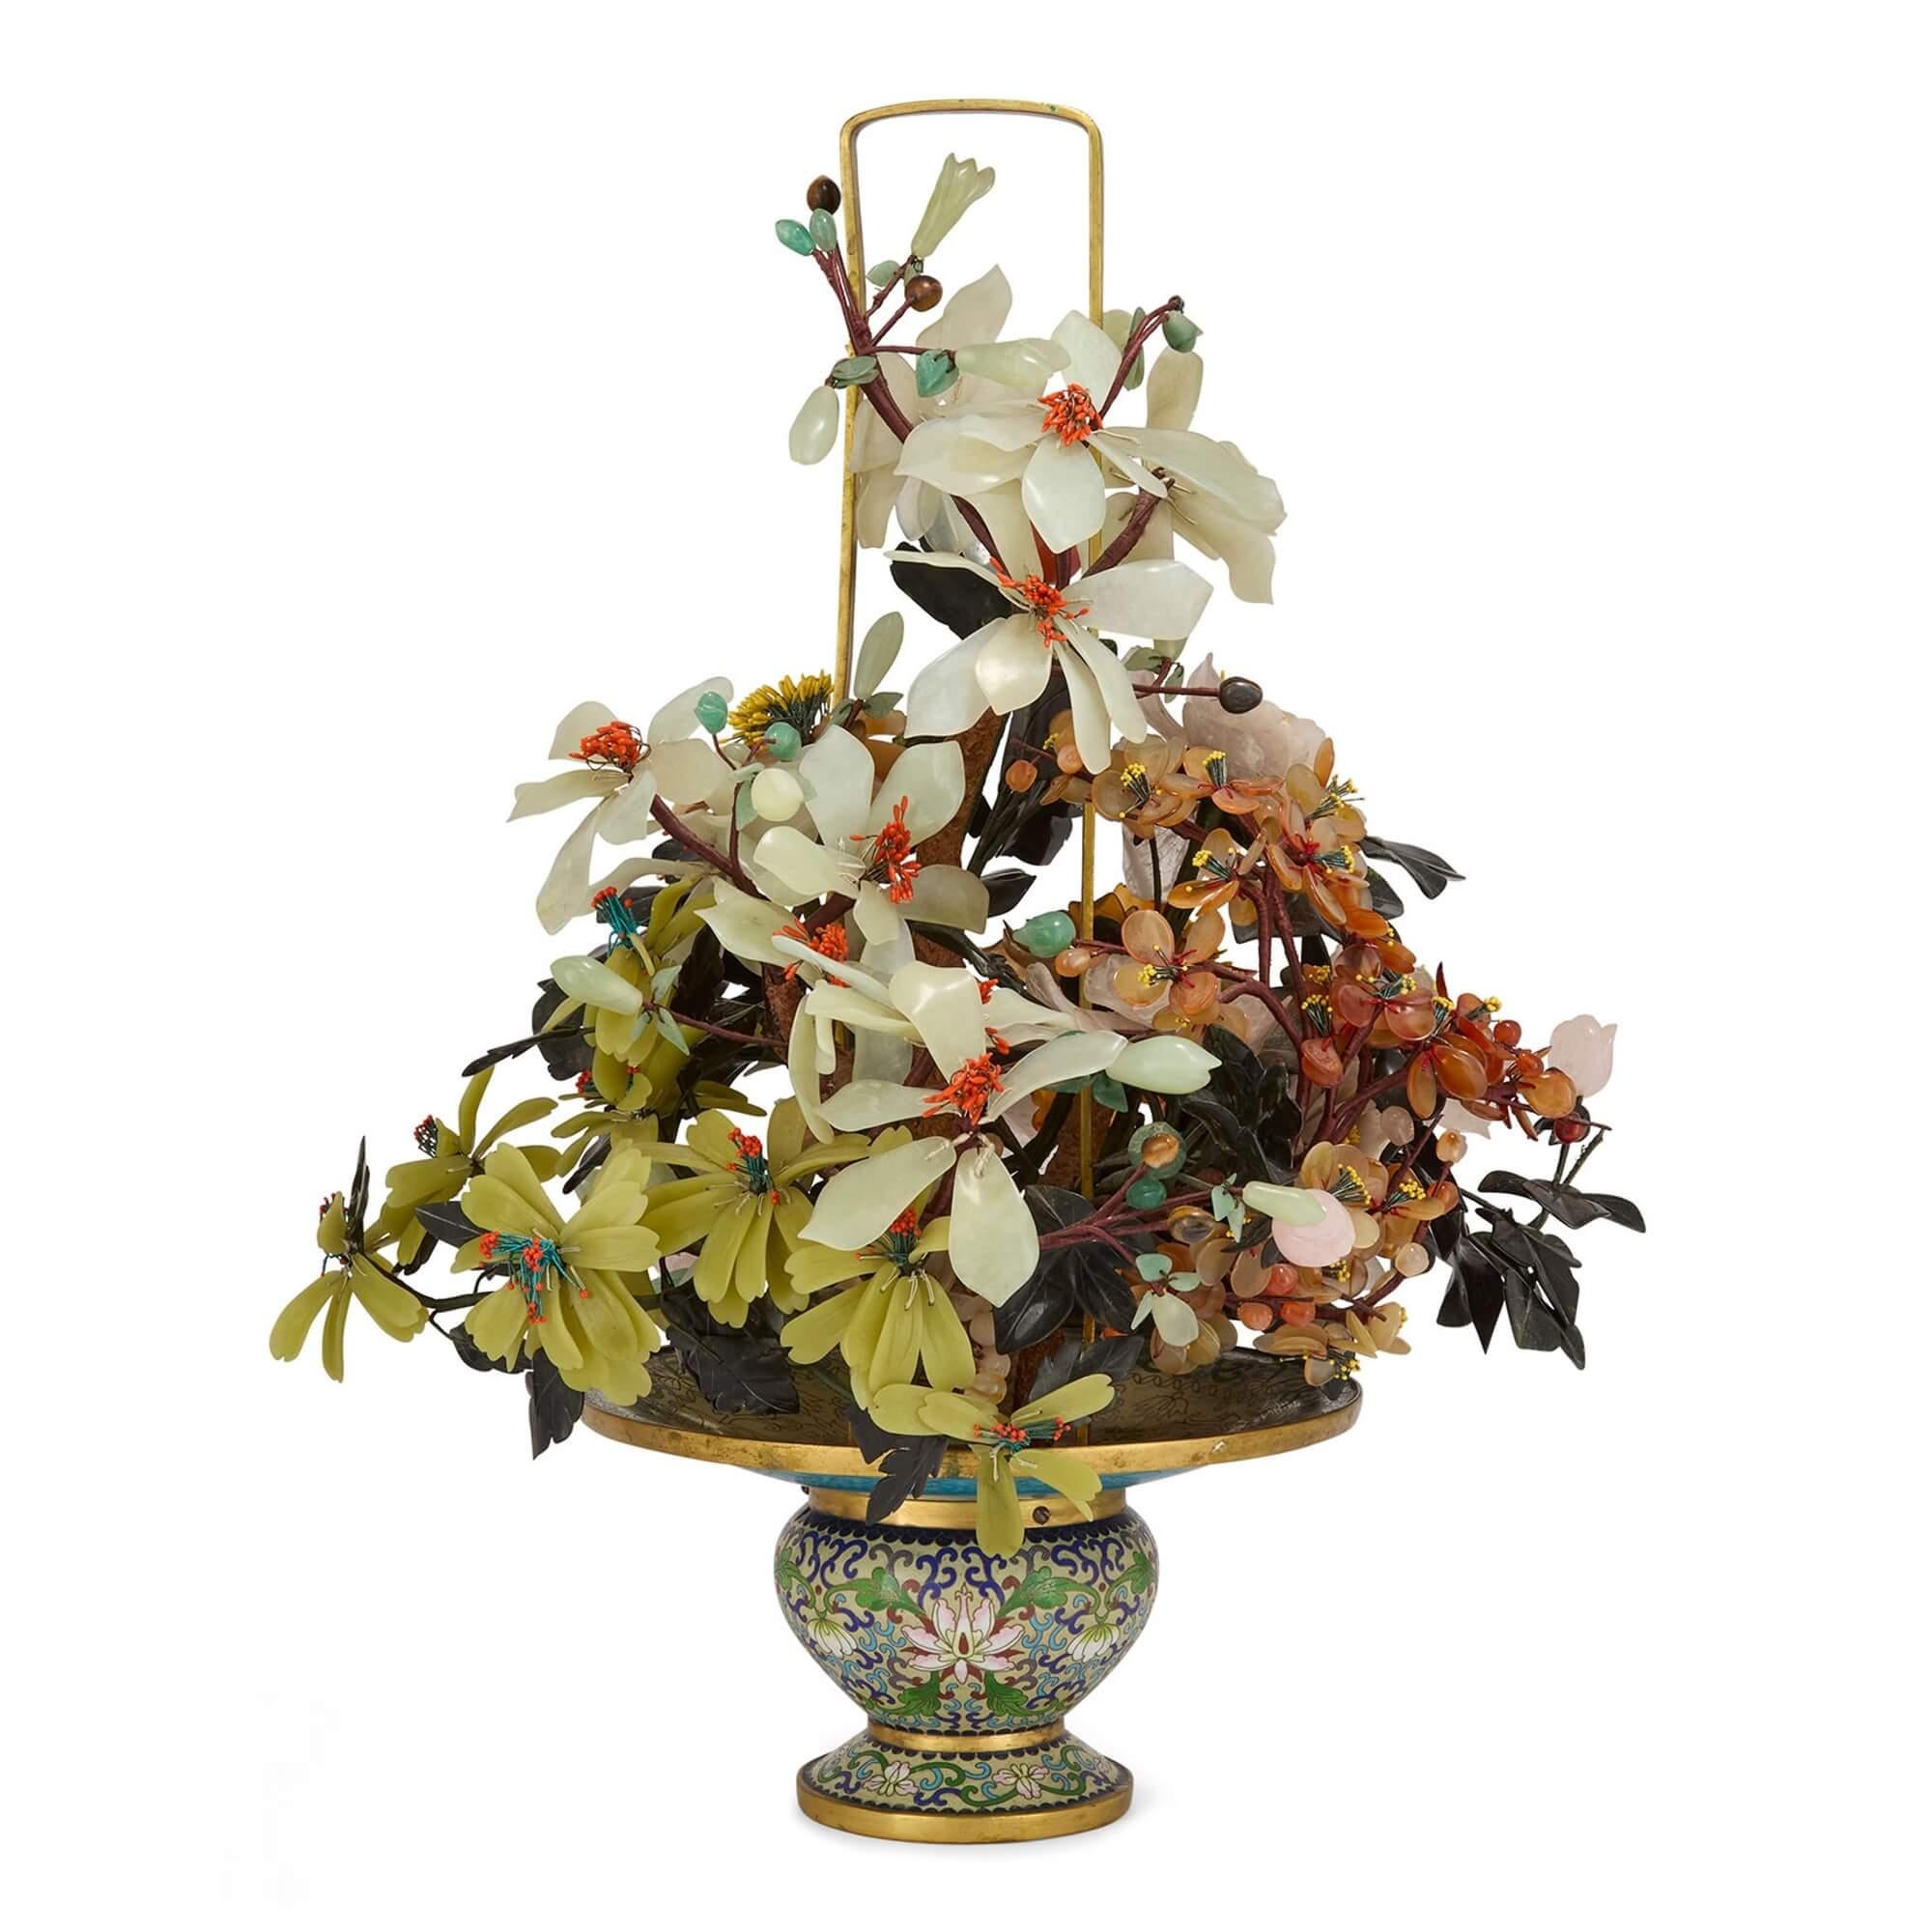 Chinese hardstone and cloisonné enamel flower tree model 
Chinese, 20th Century 
Height 54cm, width 42cm, depth 39cm

Depicting a basket filled with a lavish floral composition, this charming objet d’art was crafted in 20th century China. 

A